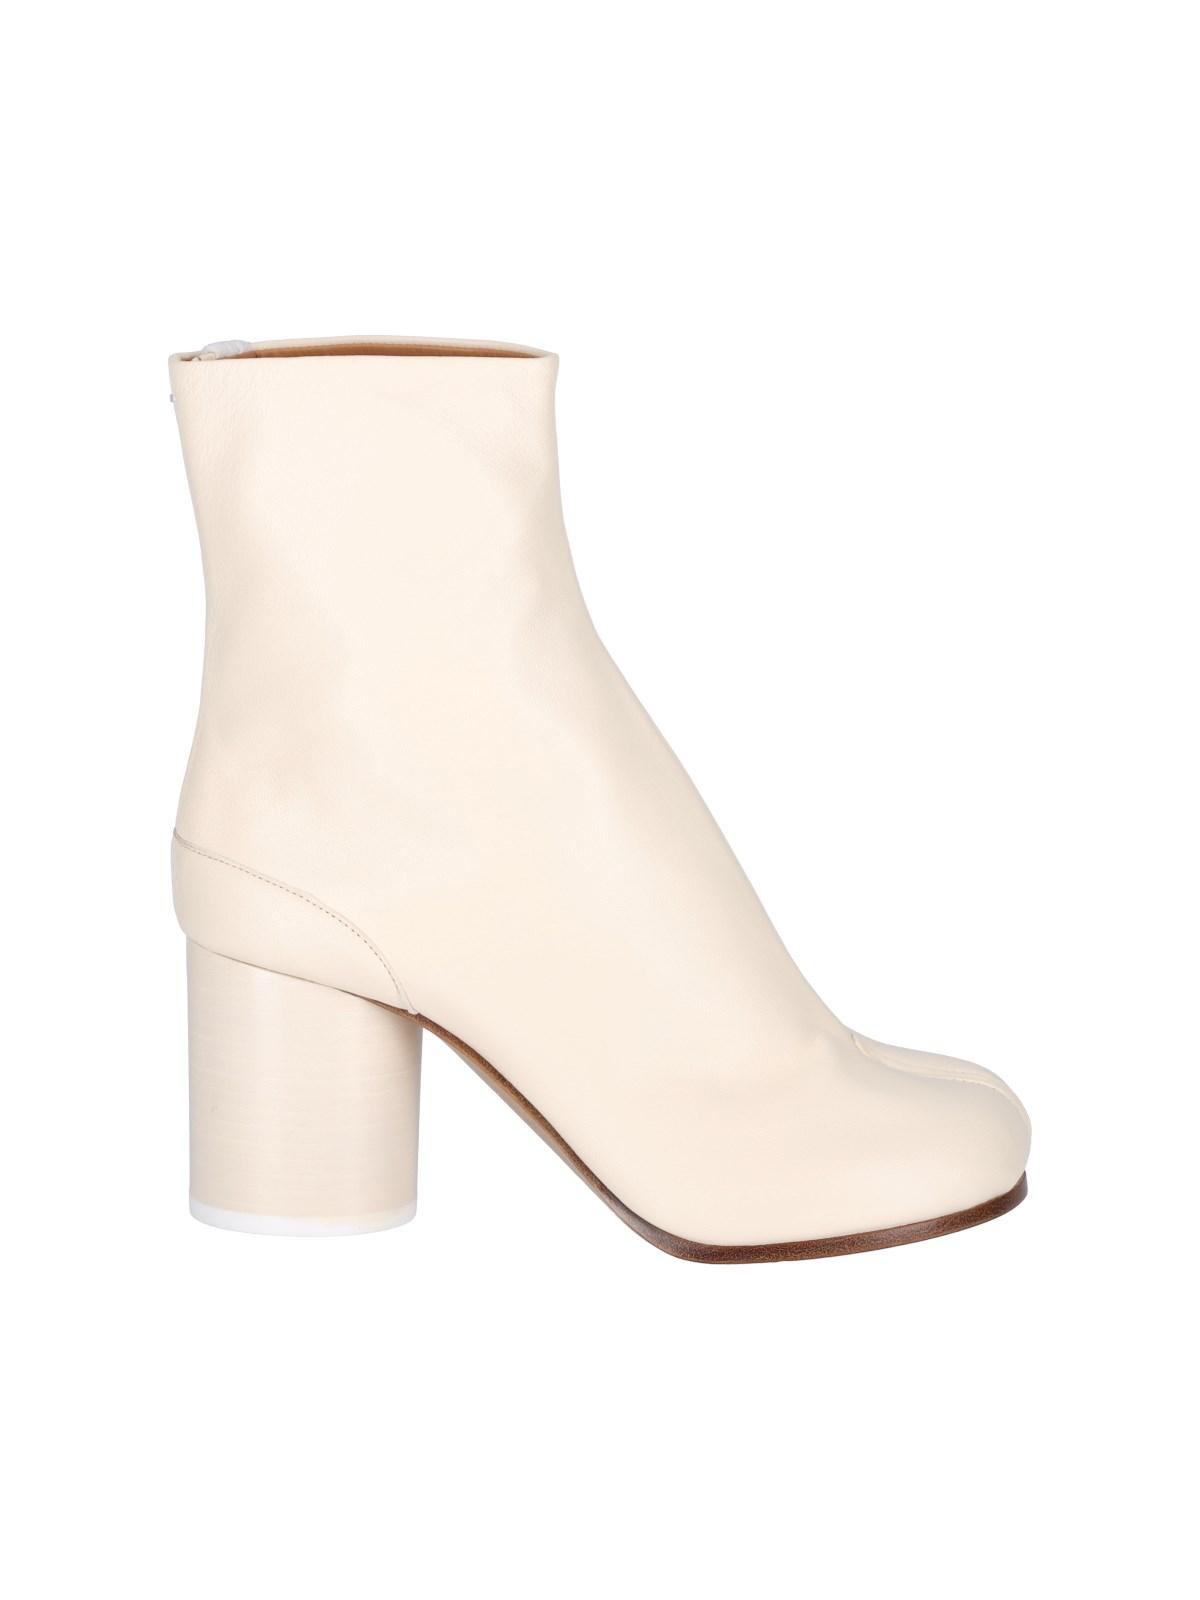 Maison Margiela 'tabi' Ankle Boots in Natural | Lyst